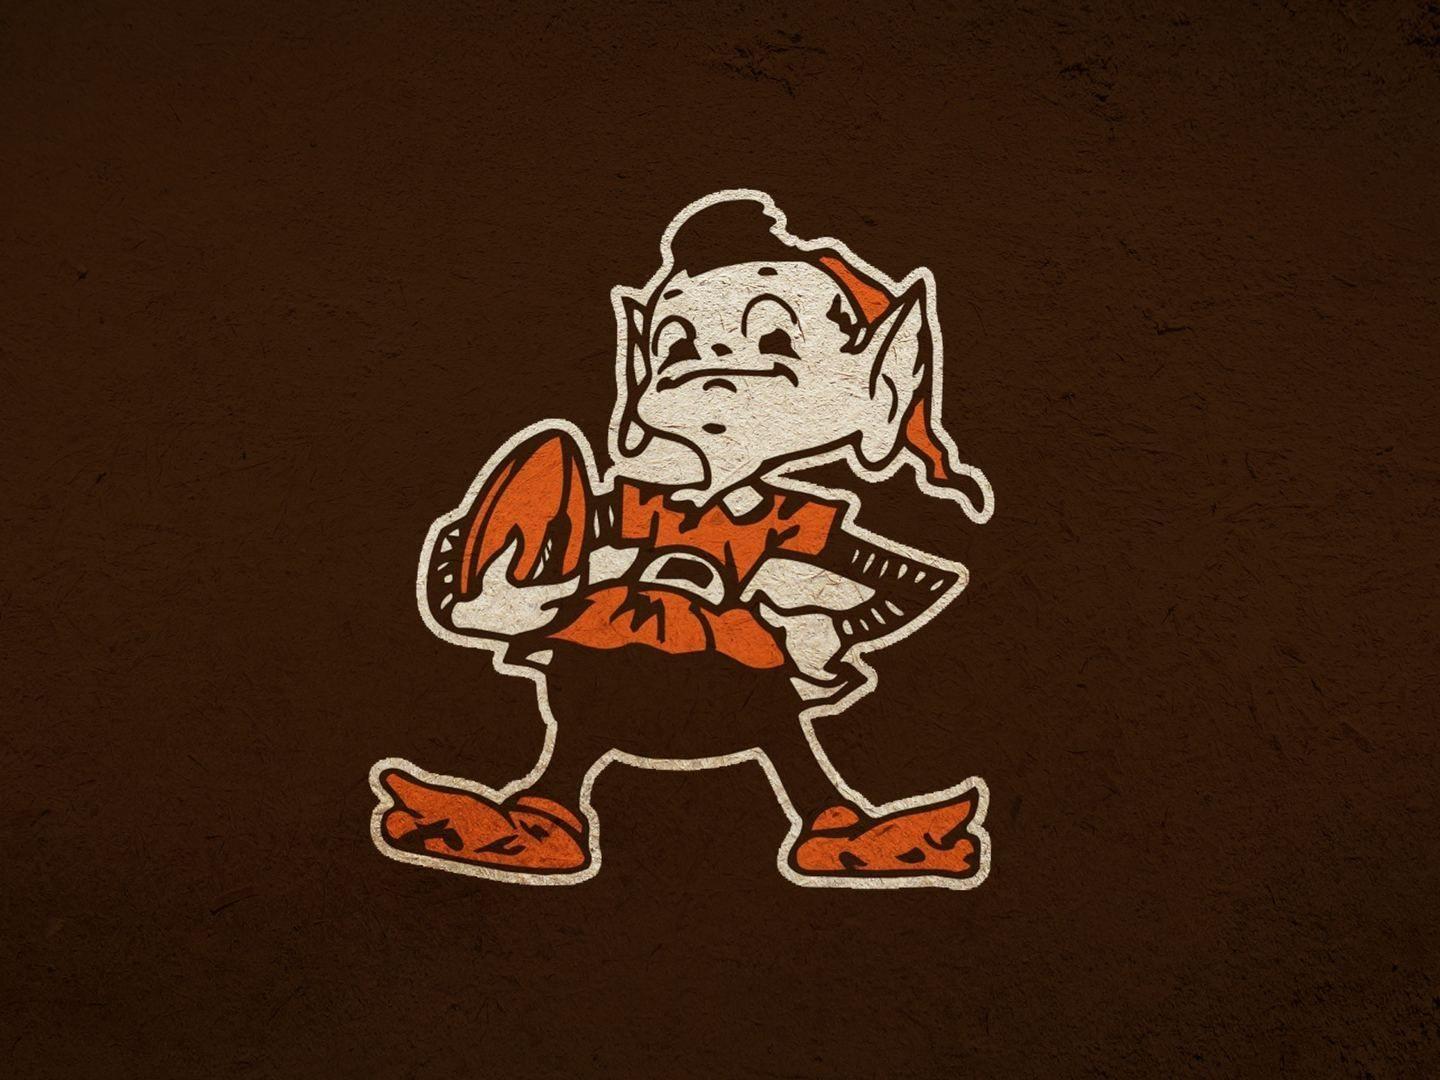 Cleveland Browns 2016 Wallpapers 1440x1080